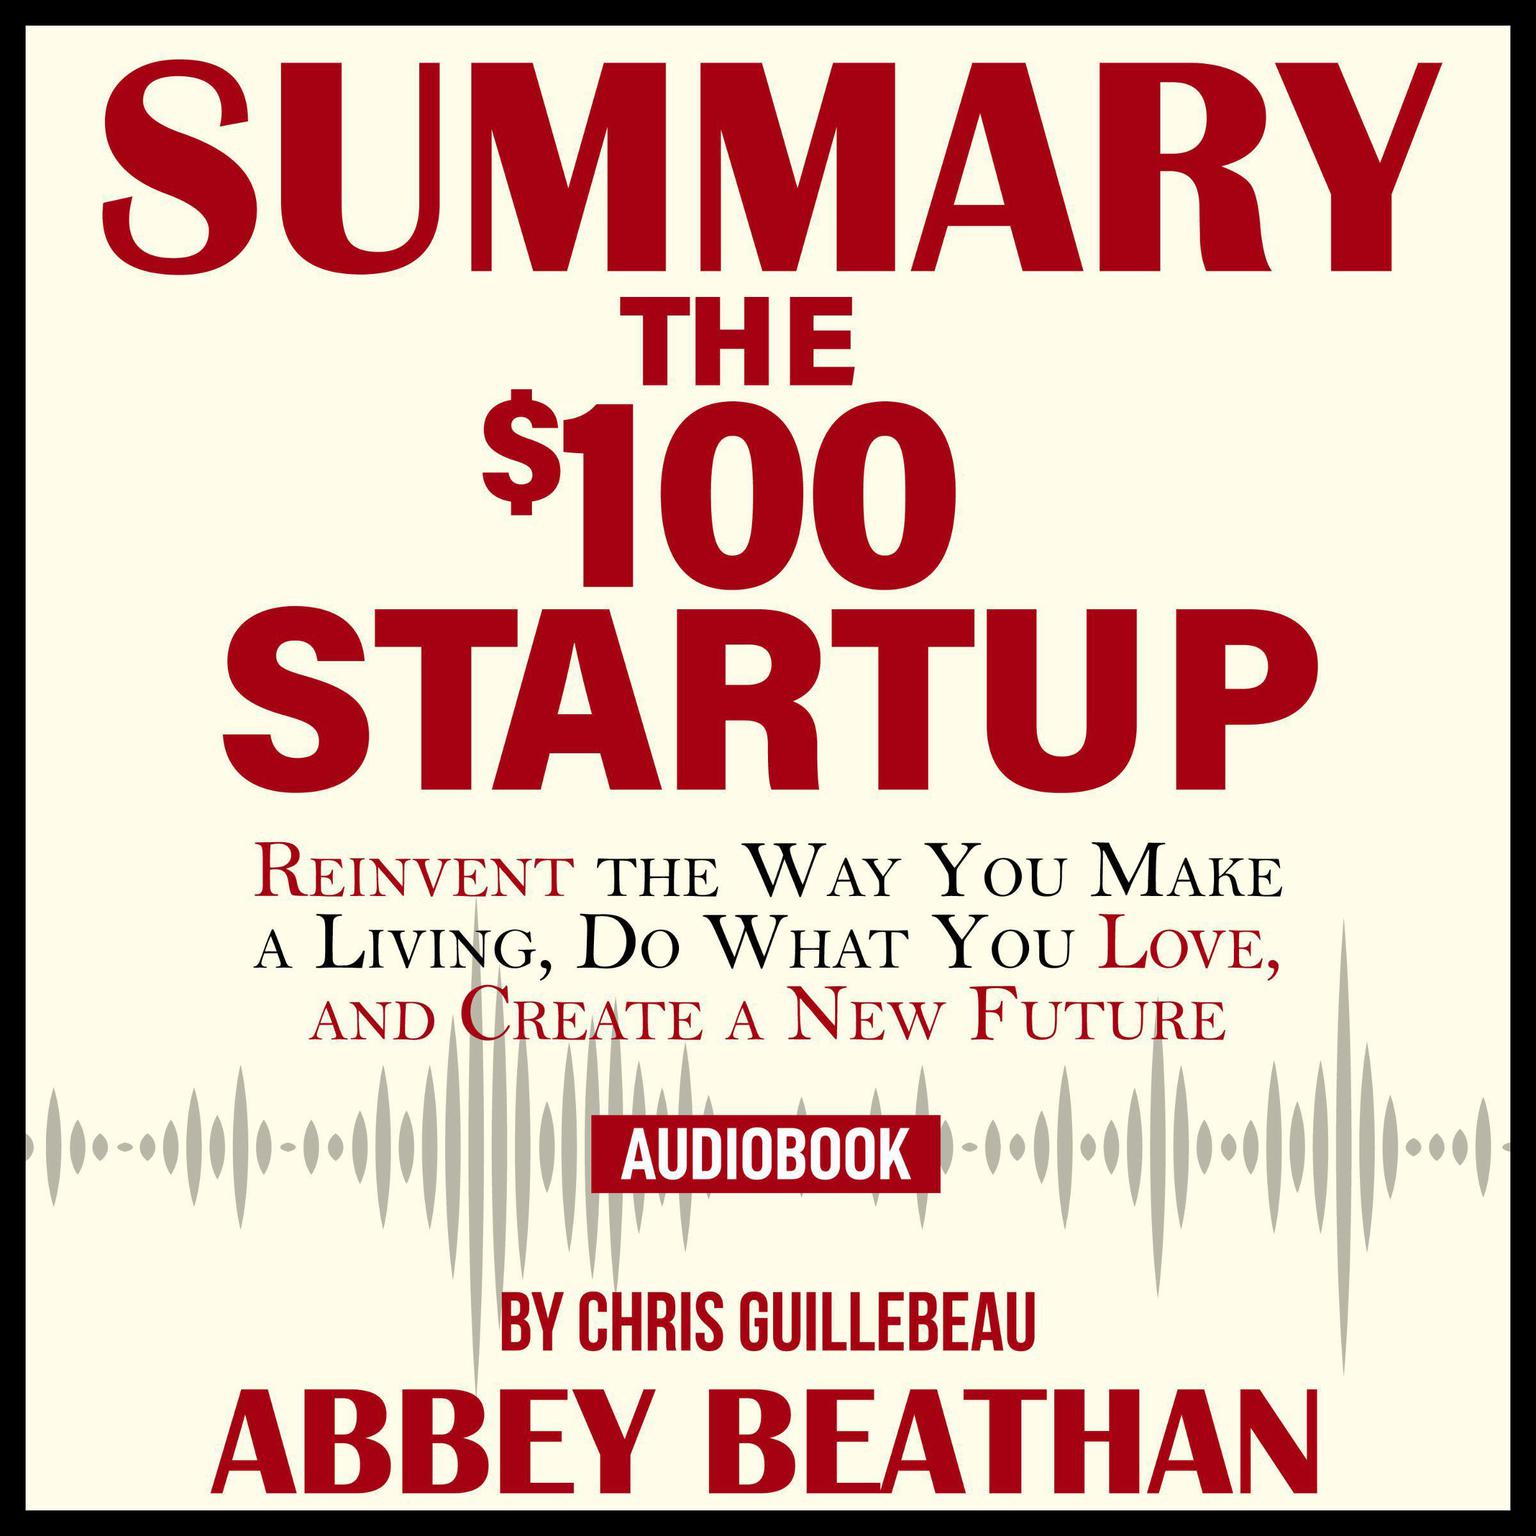 Summary of The $100 Startup: Reinvent the Way You Make a Living, Do What You Love, and Create a New Future by Chris Guillebeau Audiobook, by Abbey Beathan